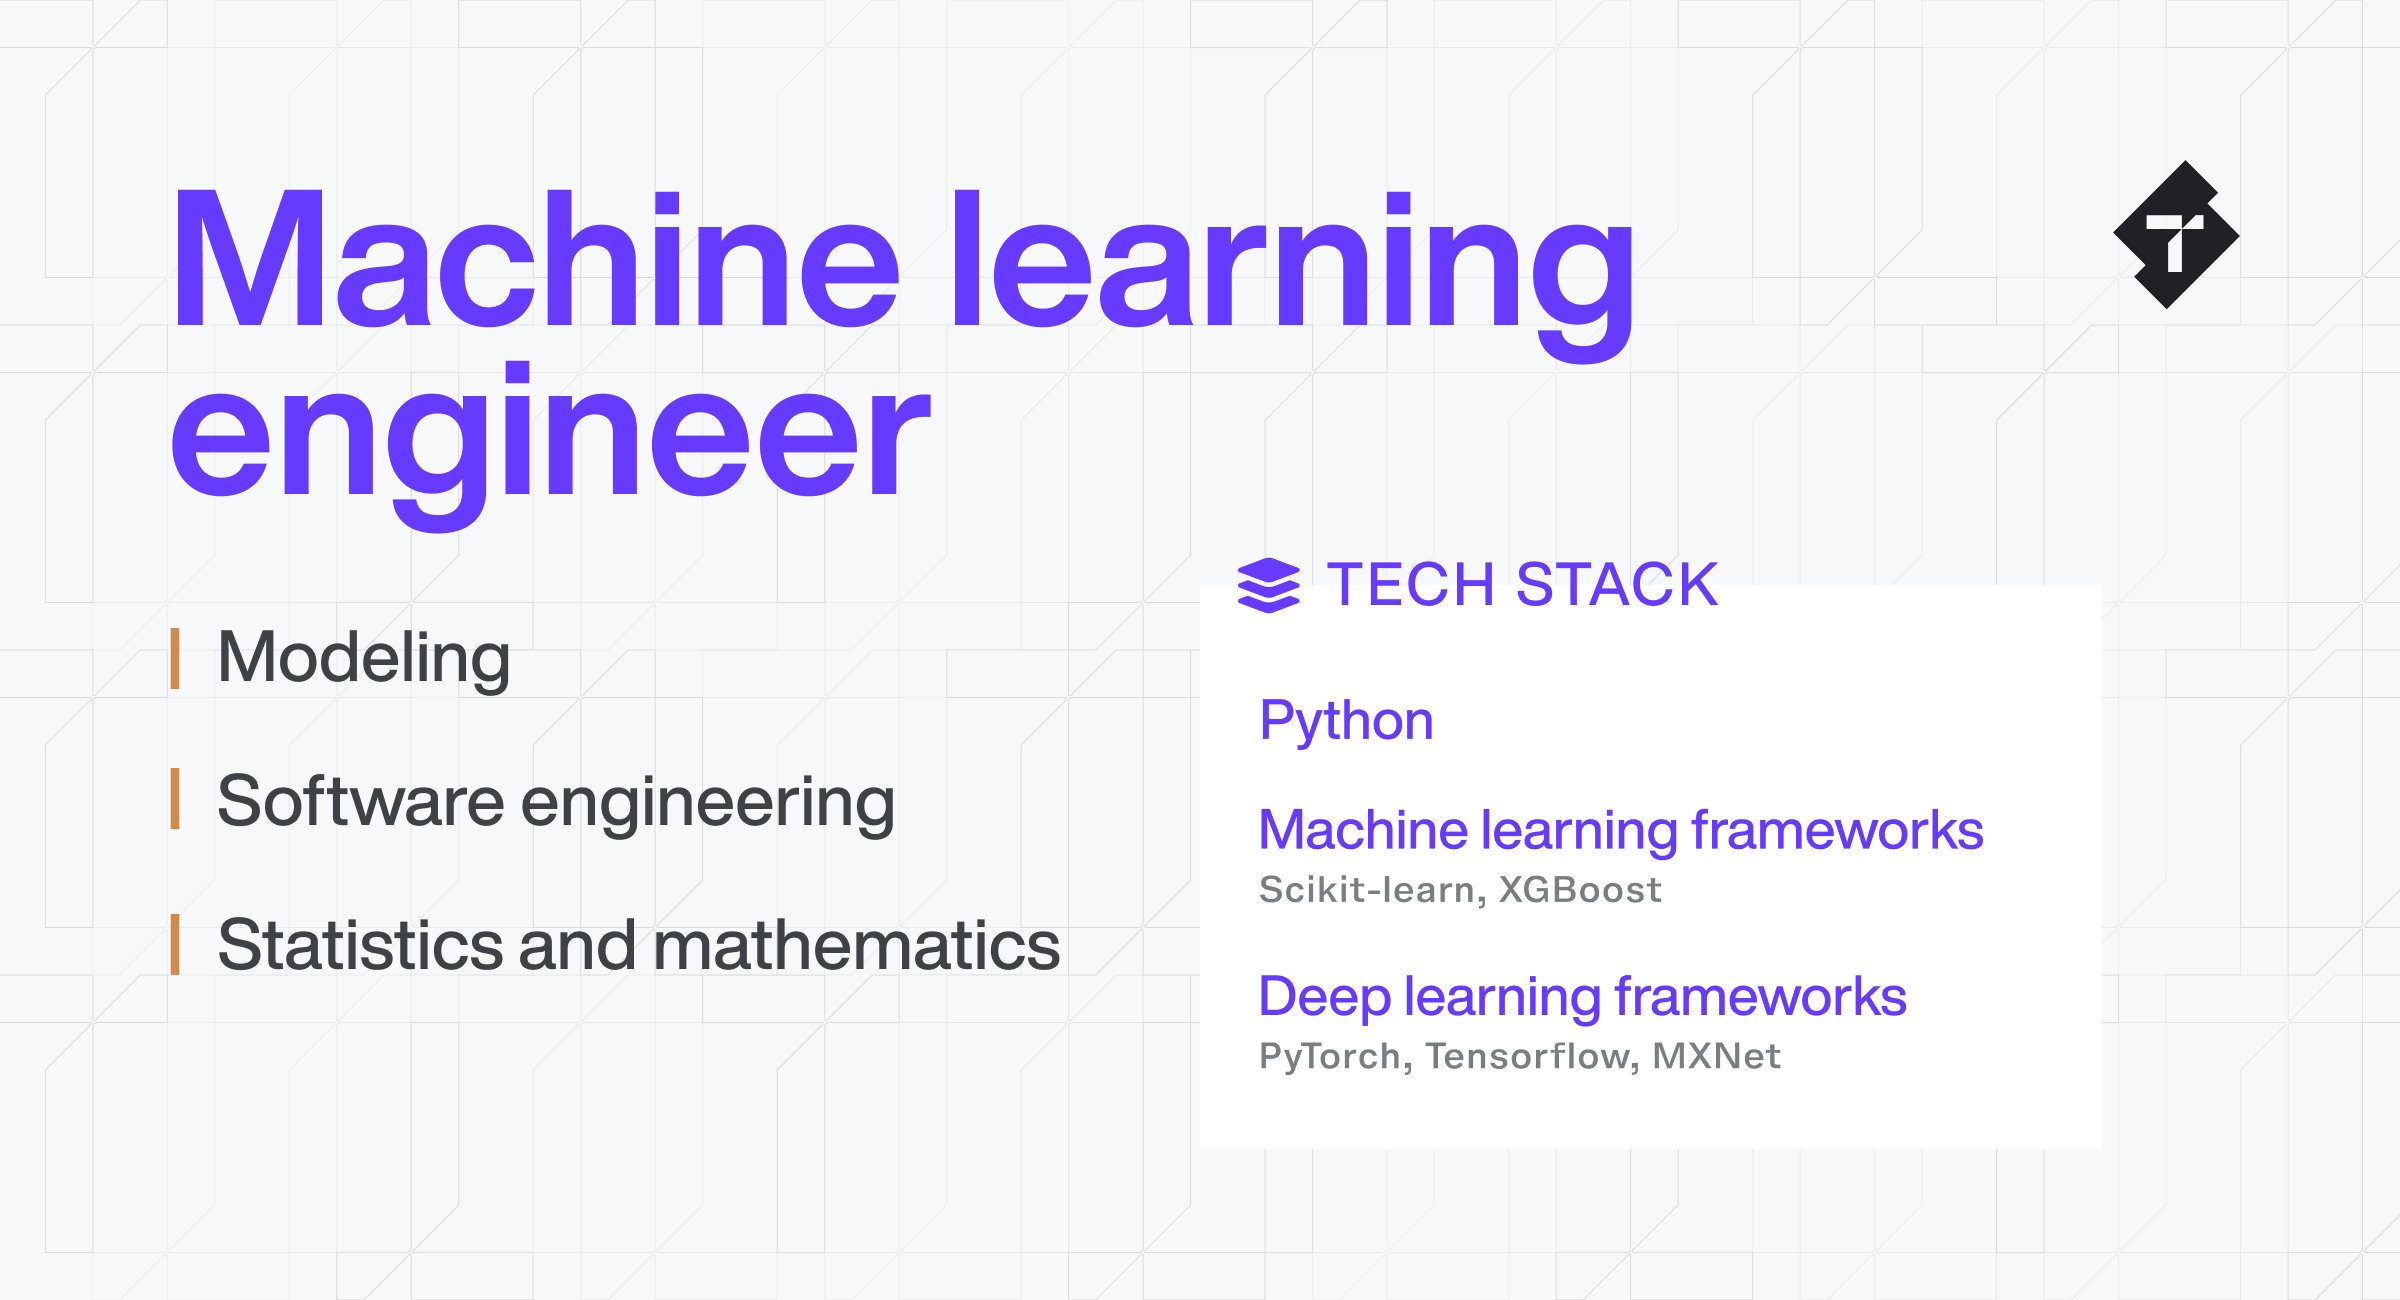 Machine learning engineer skills and tech stack